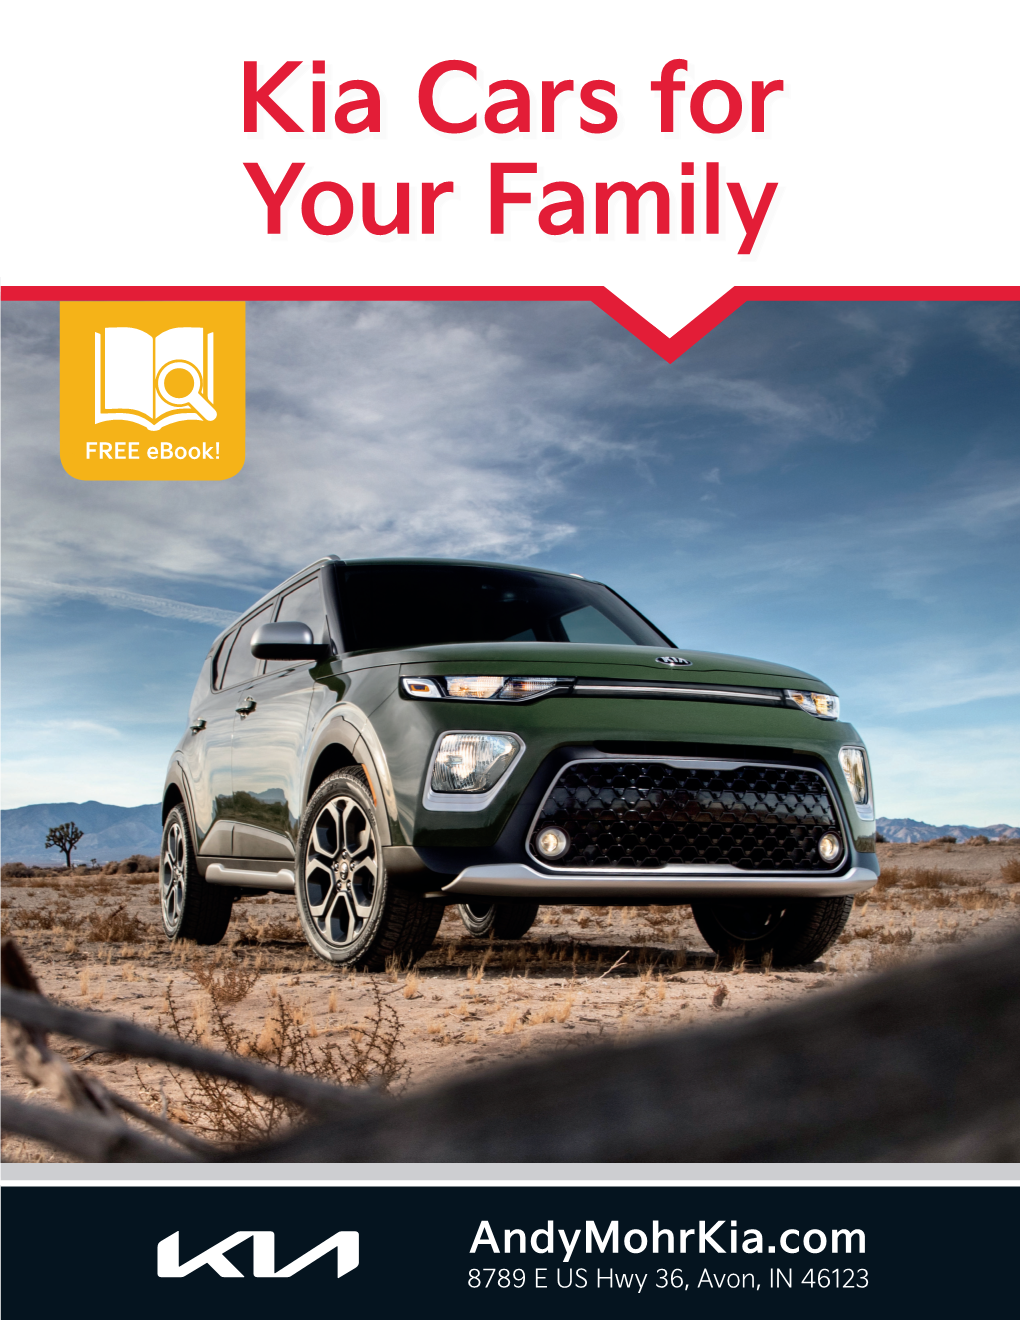 Kia Cars for Your Family